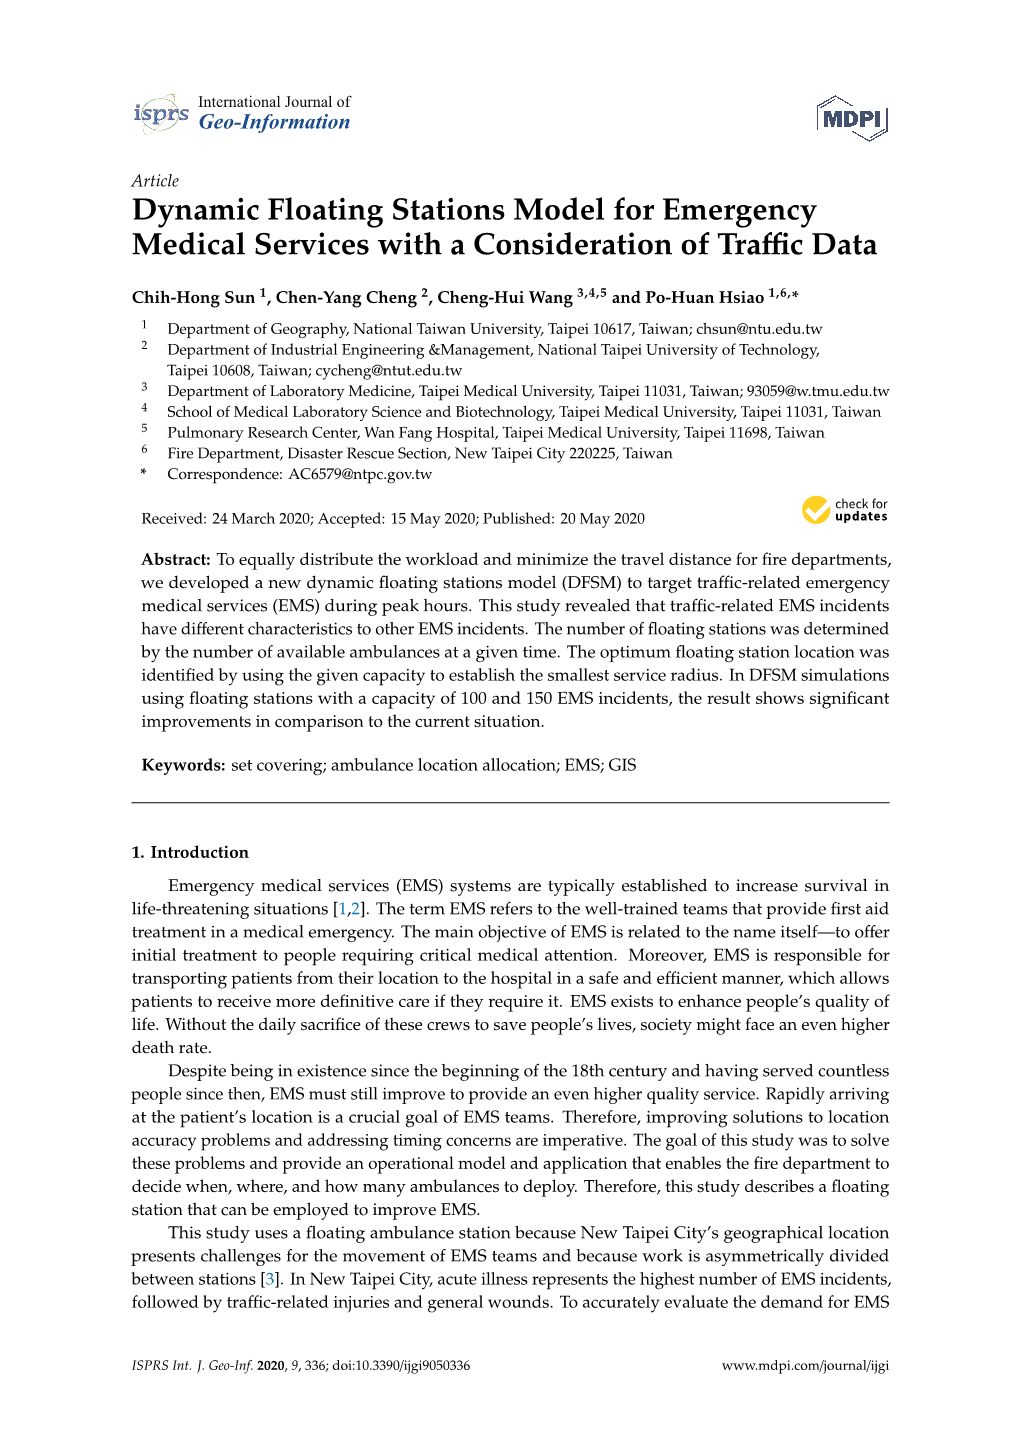 Dynamic Floating Stations Model for Emergency Medical Services with a Consideration of Traffic Data